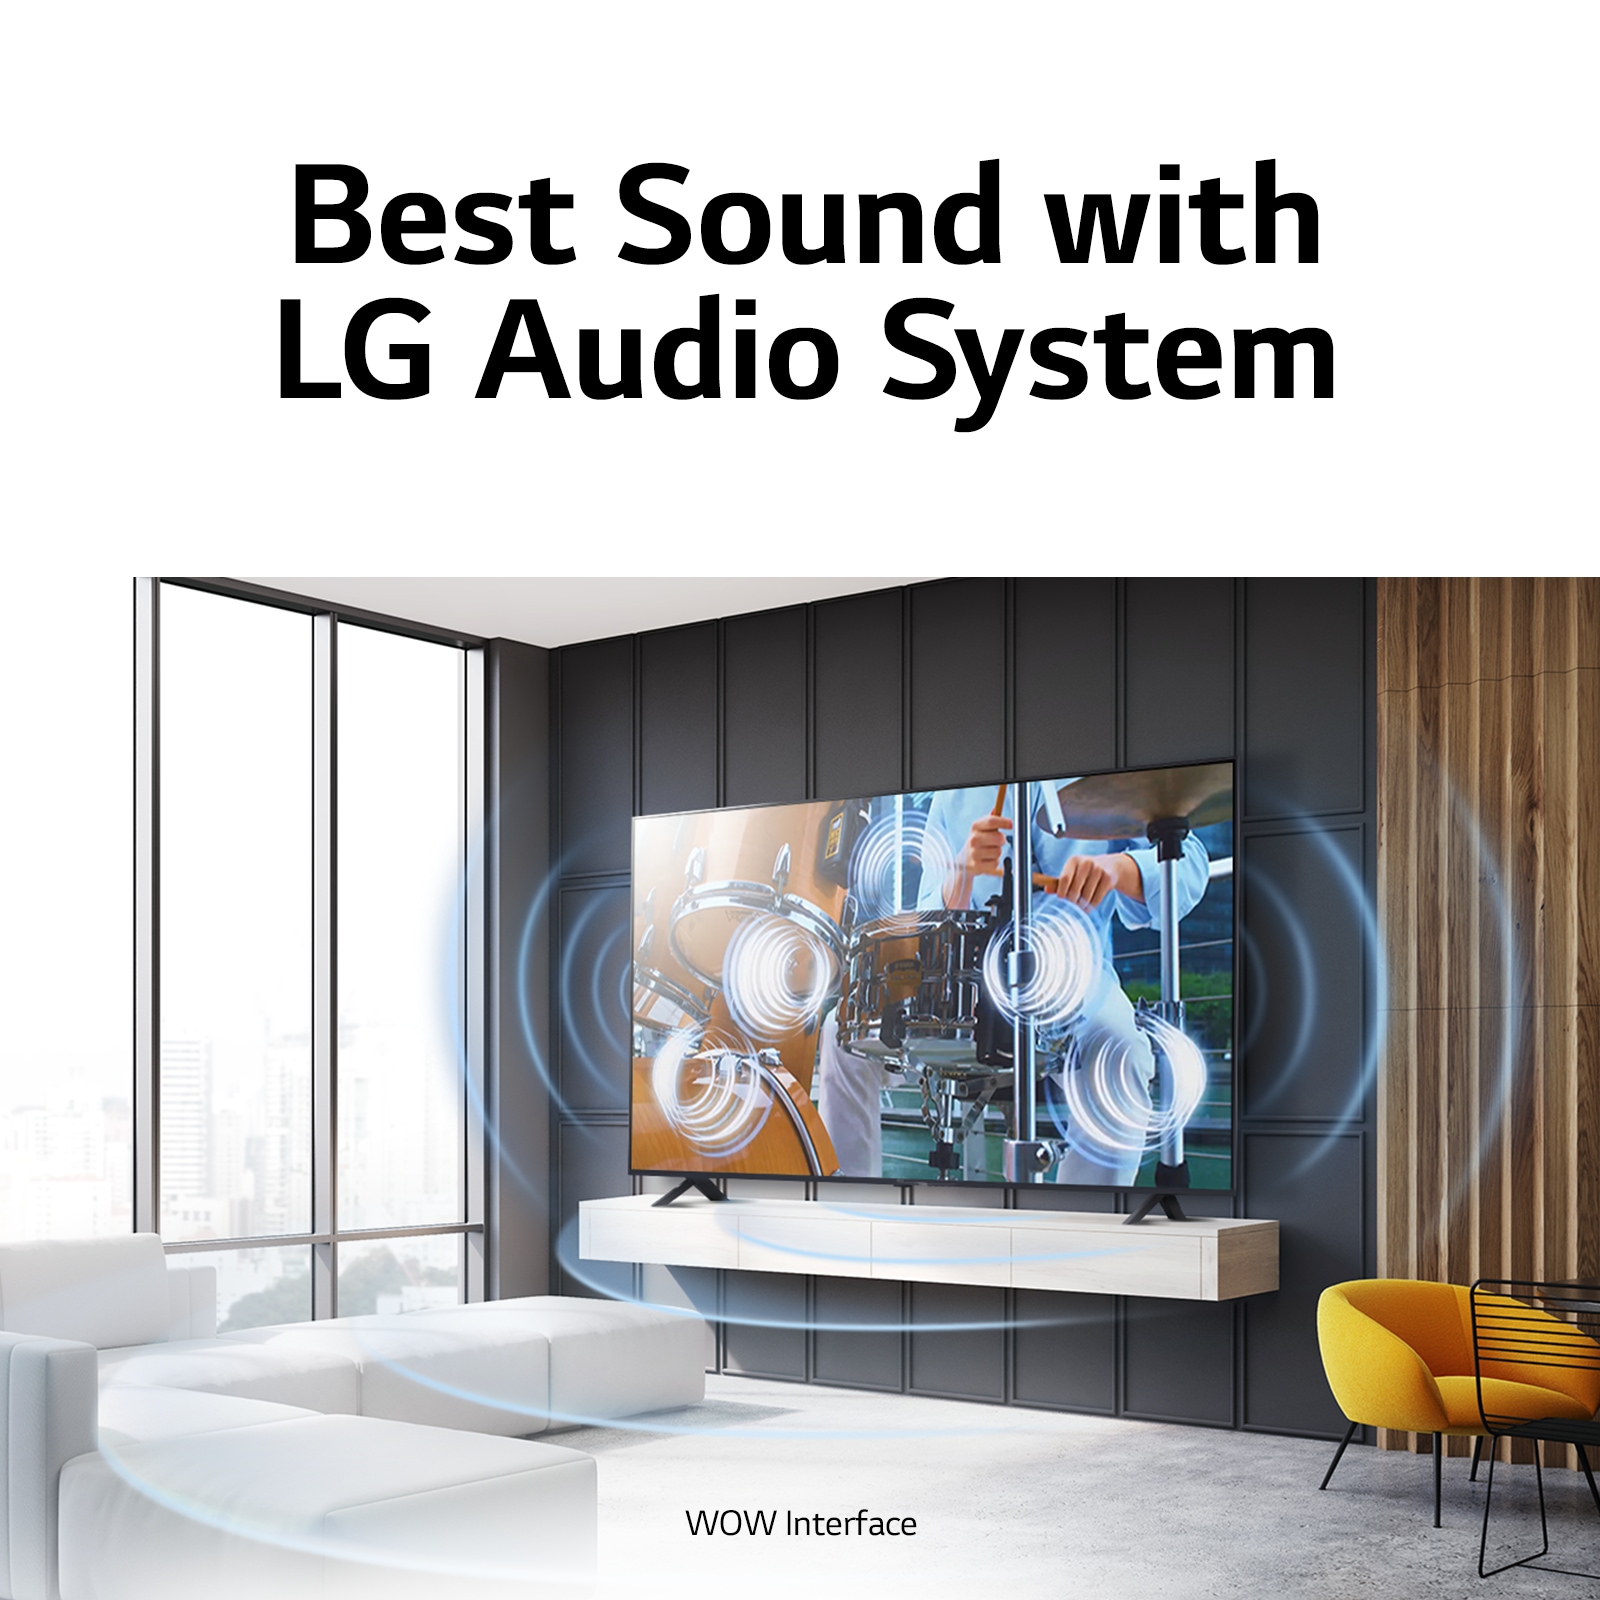 Enriched - CE - LG UHD Series - LG Audio System